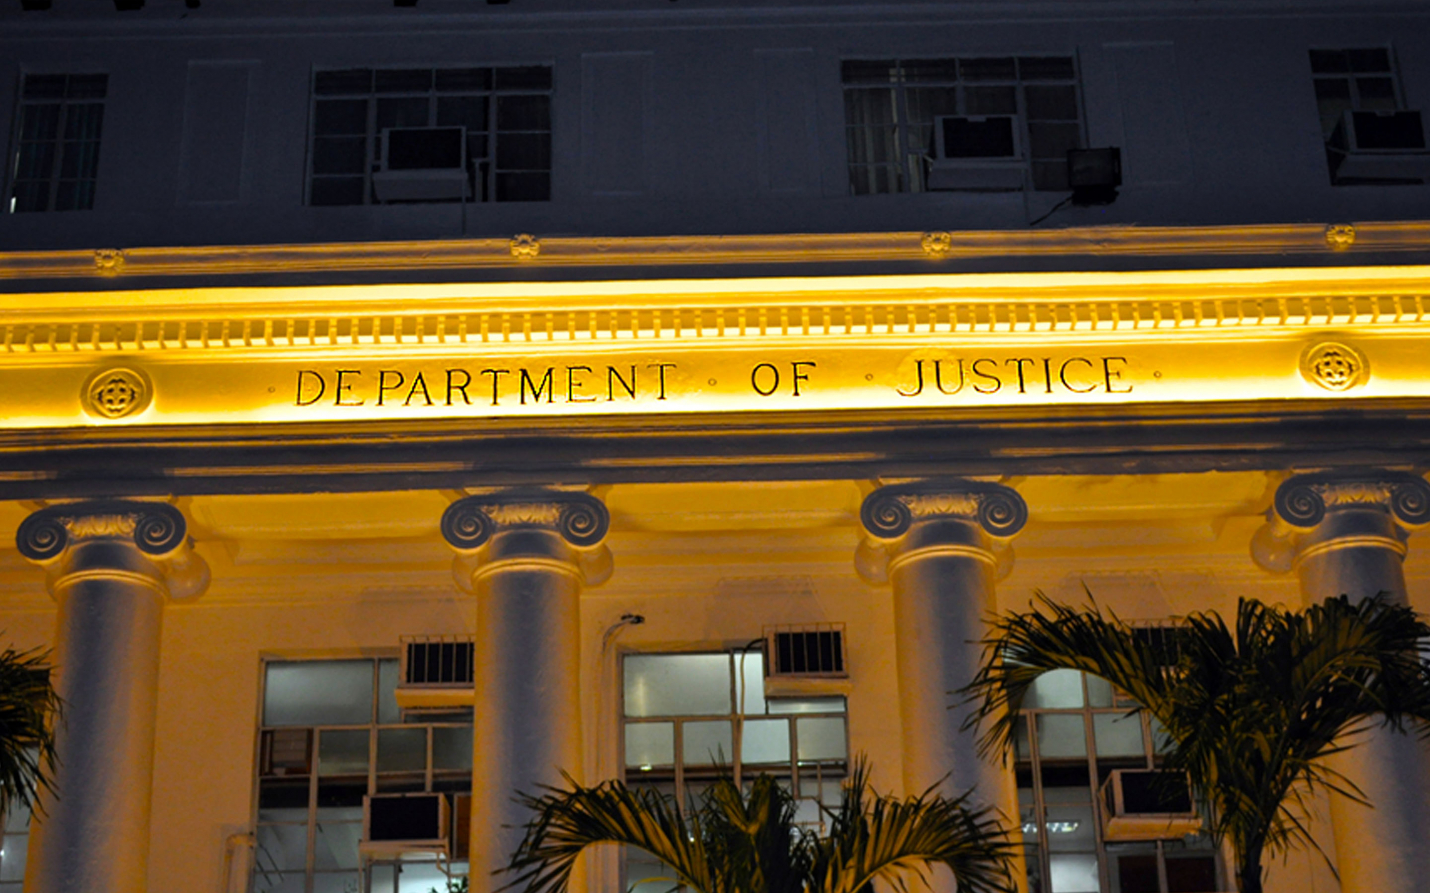 The Philippines Department of Justice building at night